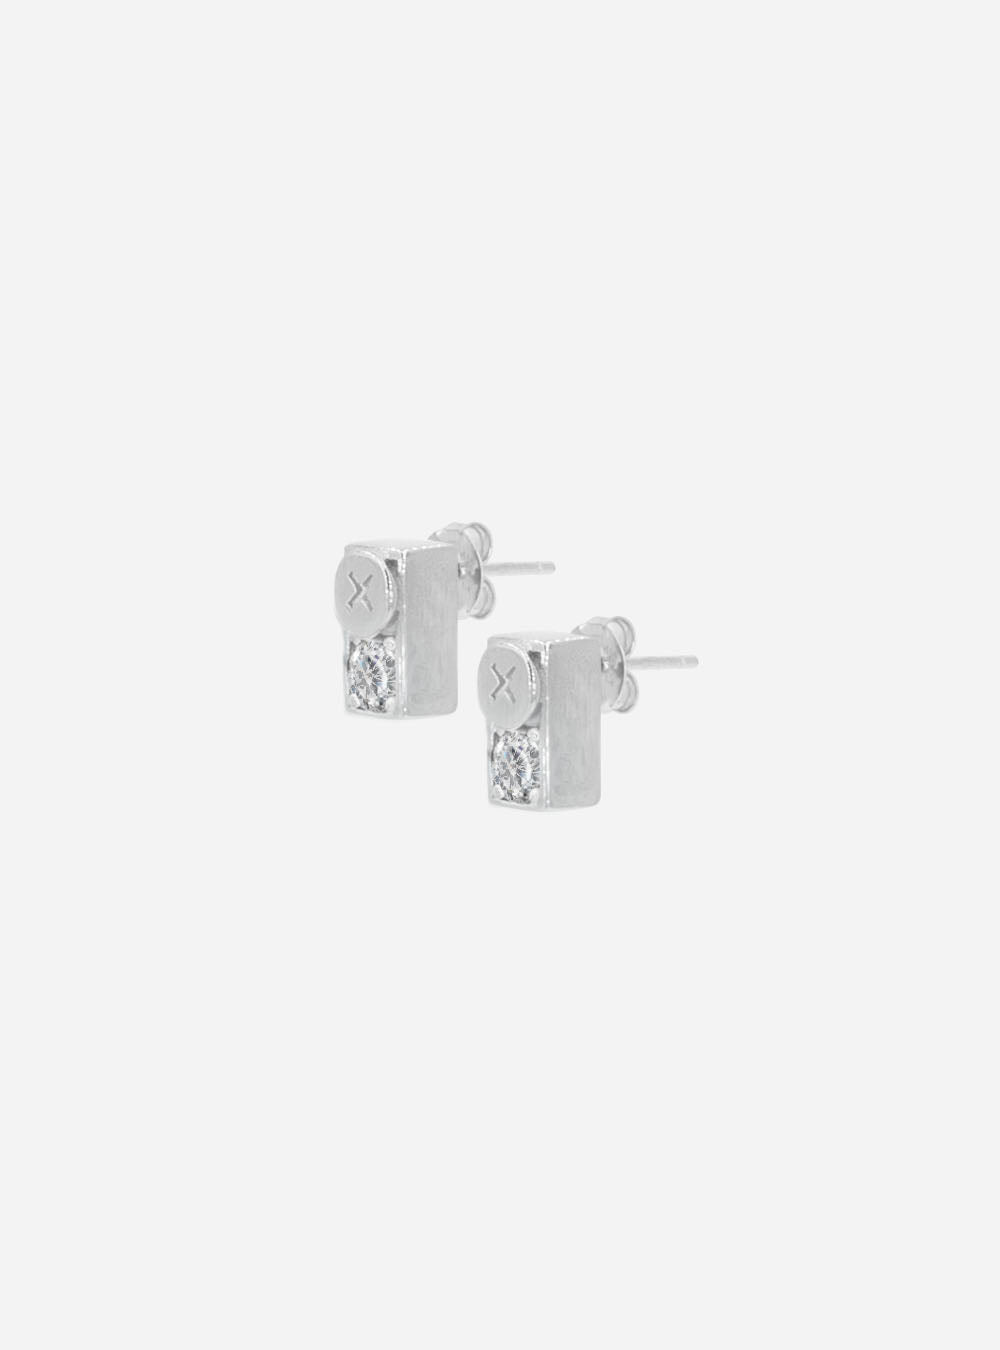 a pair of MIDNIGHTFACTORY Screwbox earrings on a white background.